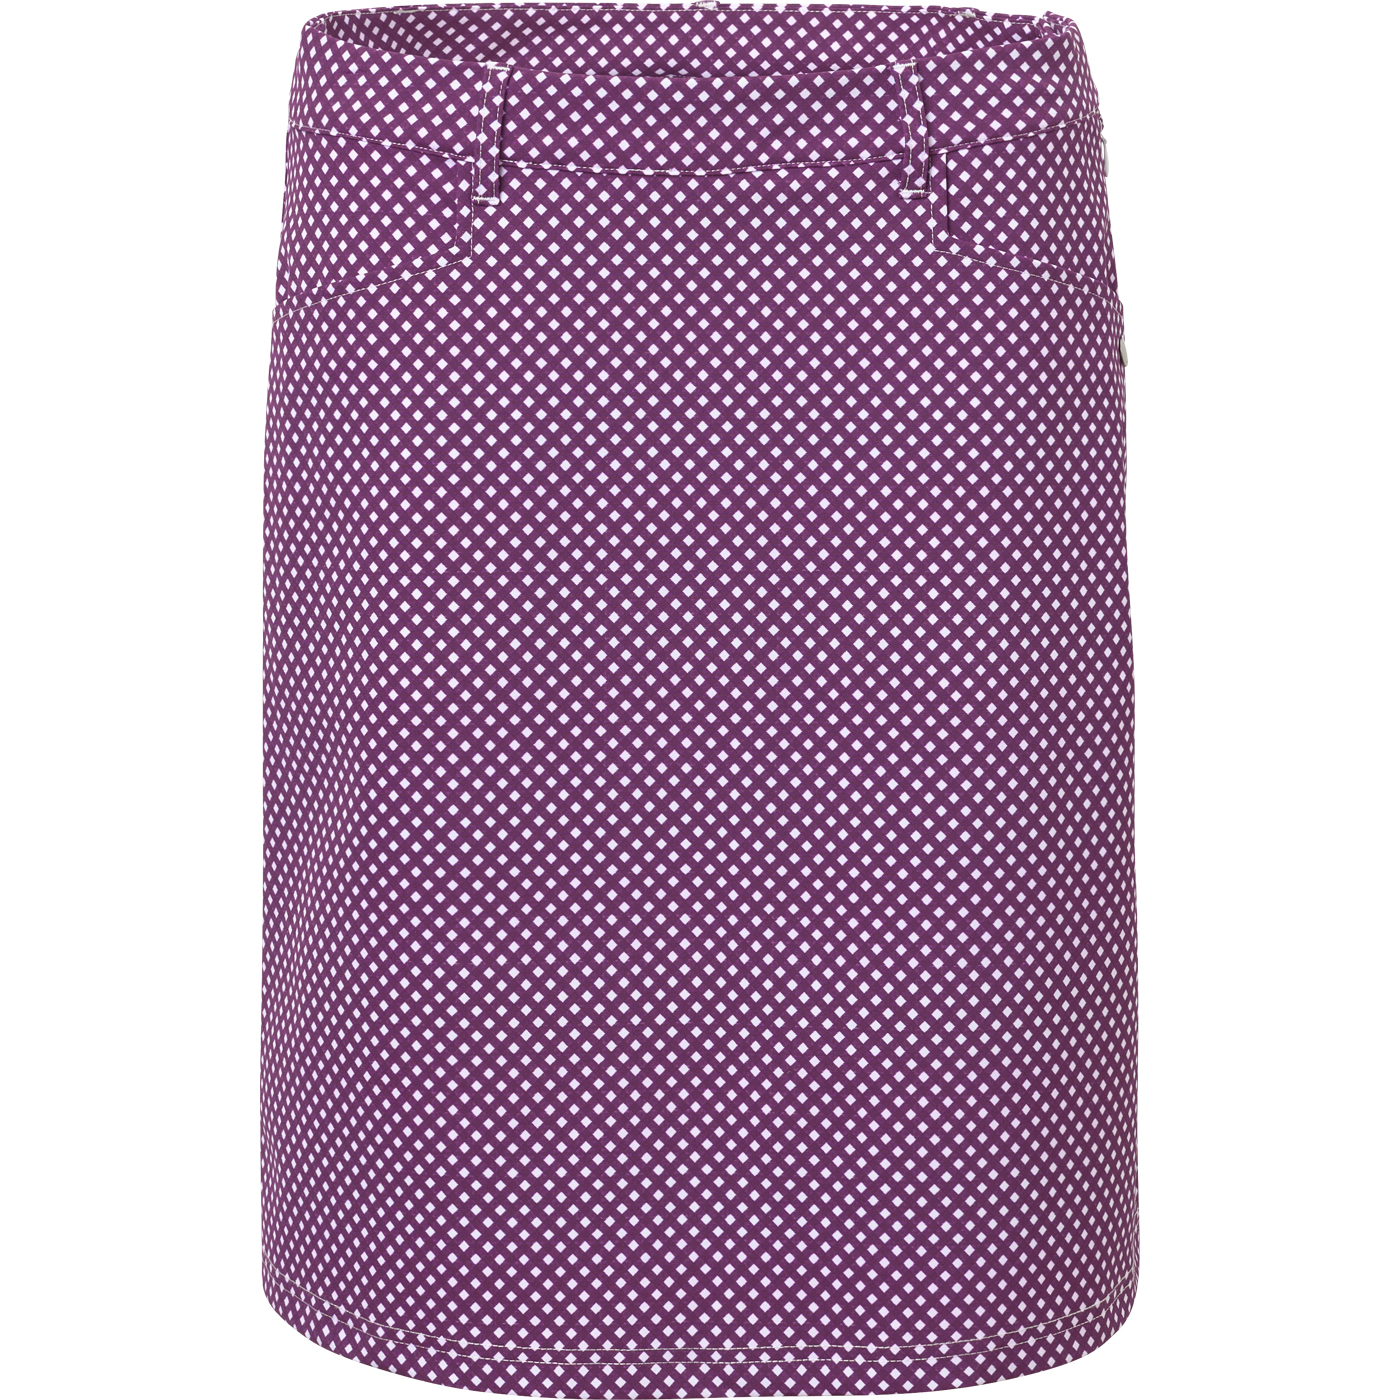 Lds Merion skort 50cm - violet check in the group WOMEN / All clothing at Abacus Sportswear (2984735)